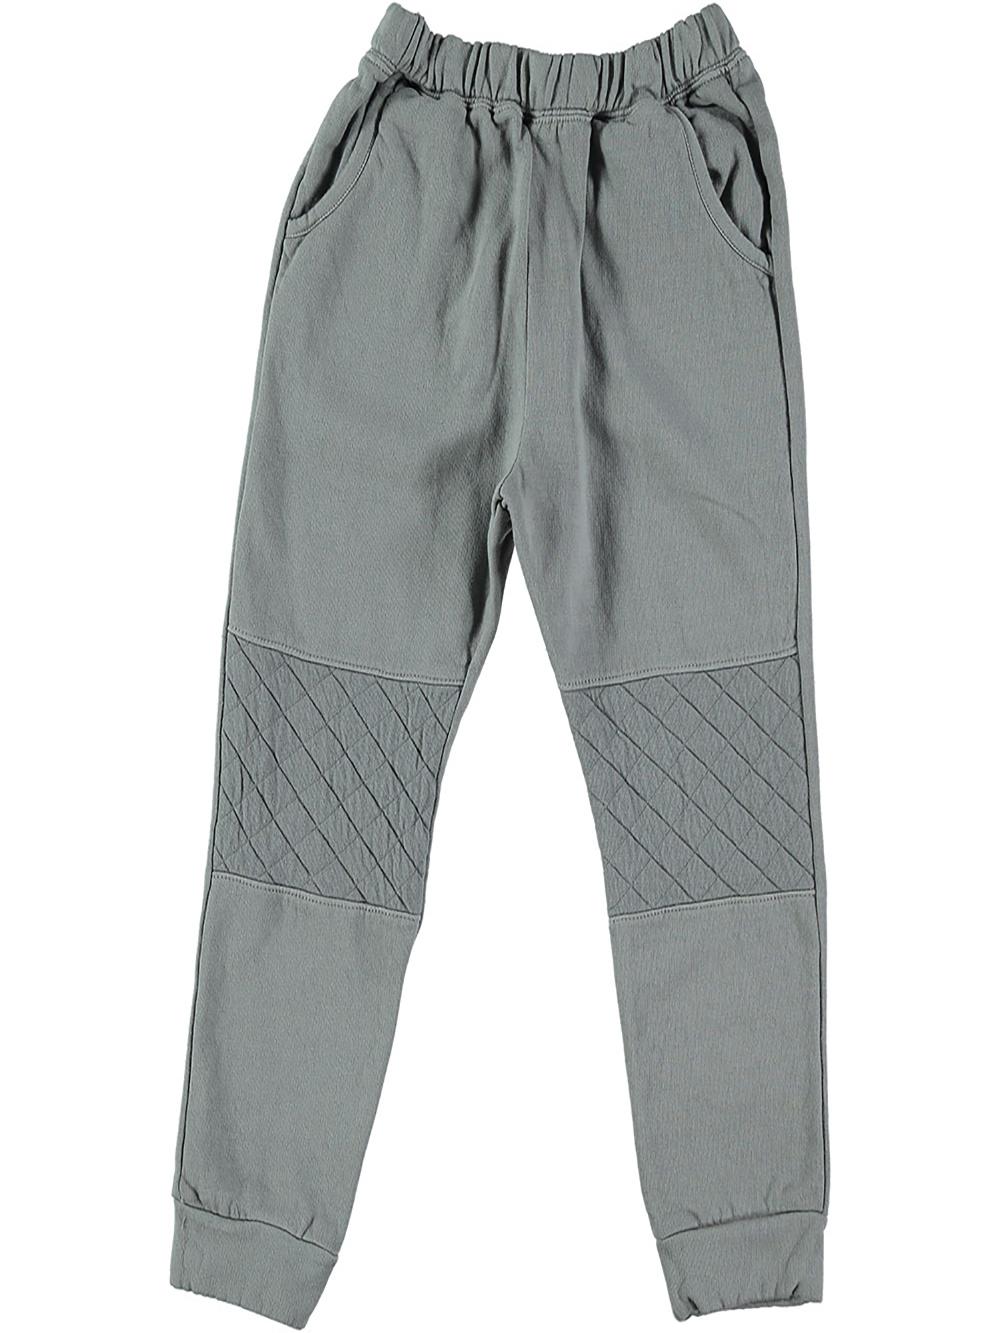 GRAY PANTS WITH PADDED KNEE PADS